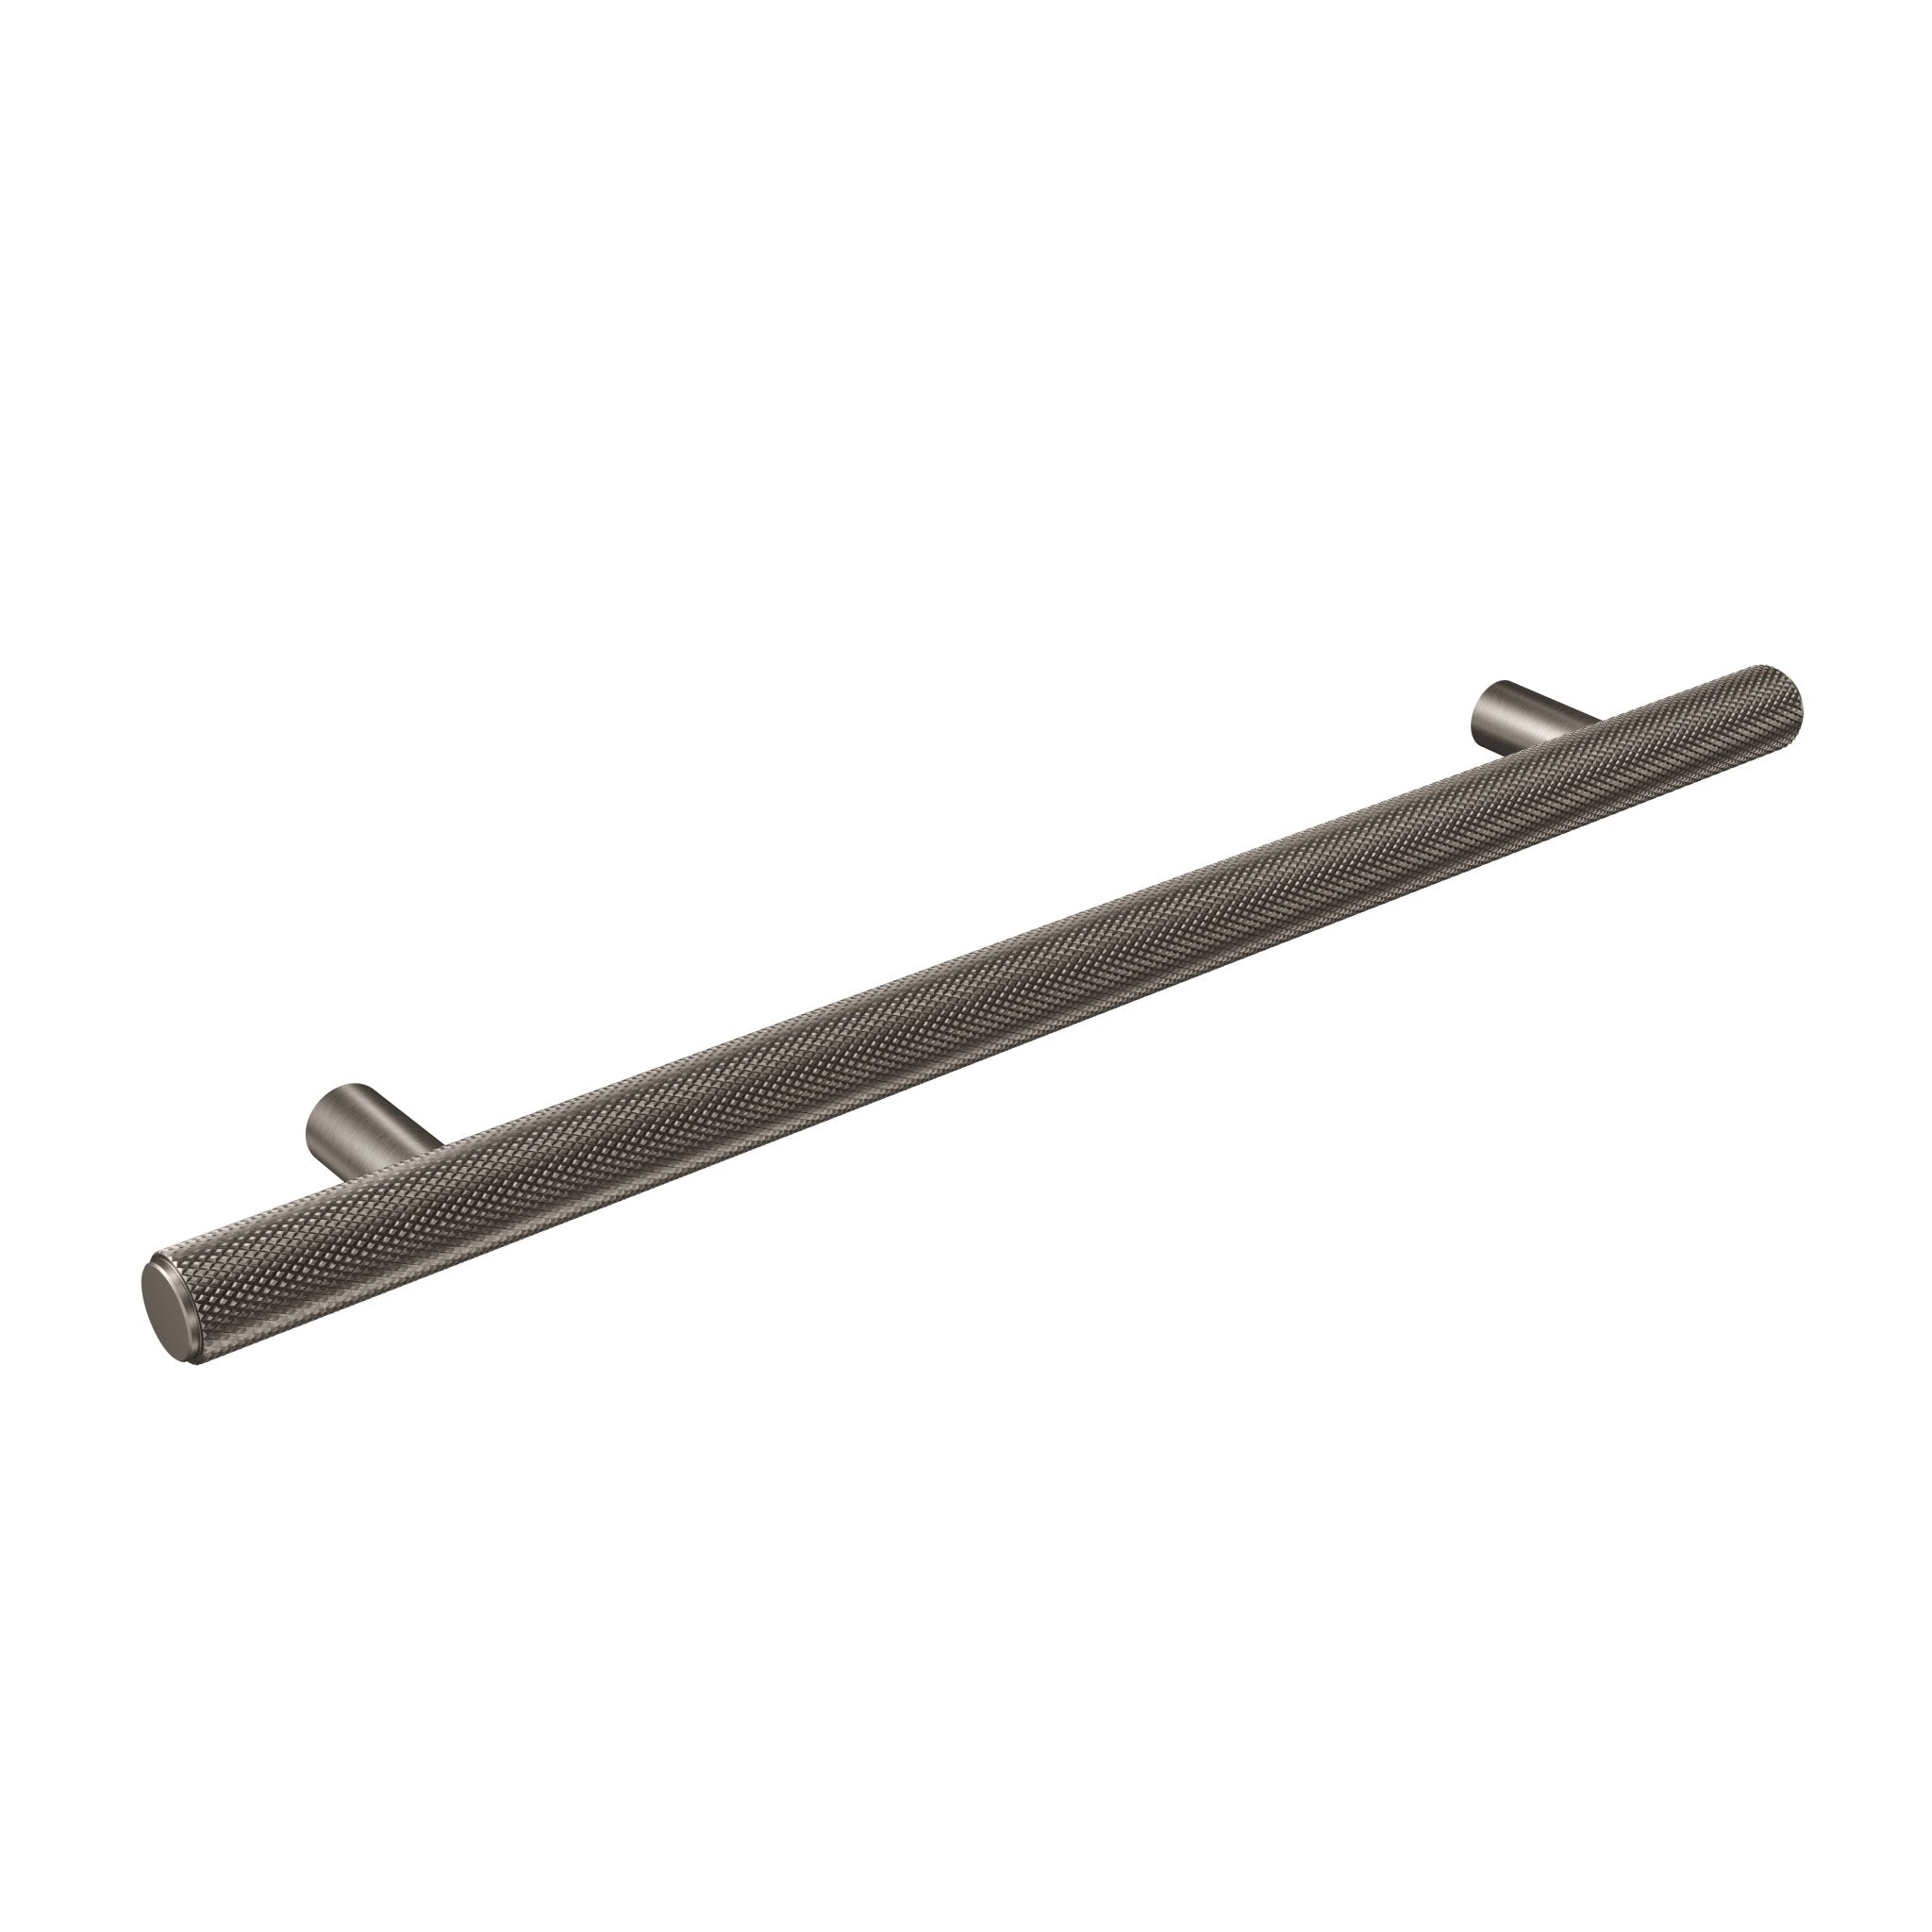 Knurl 15mm Pull Handle-Industrial Nickel-300mm-The Hairpin Leg Co.